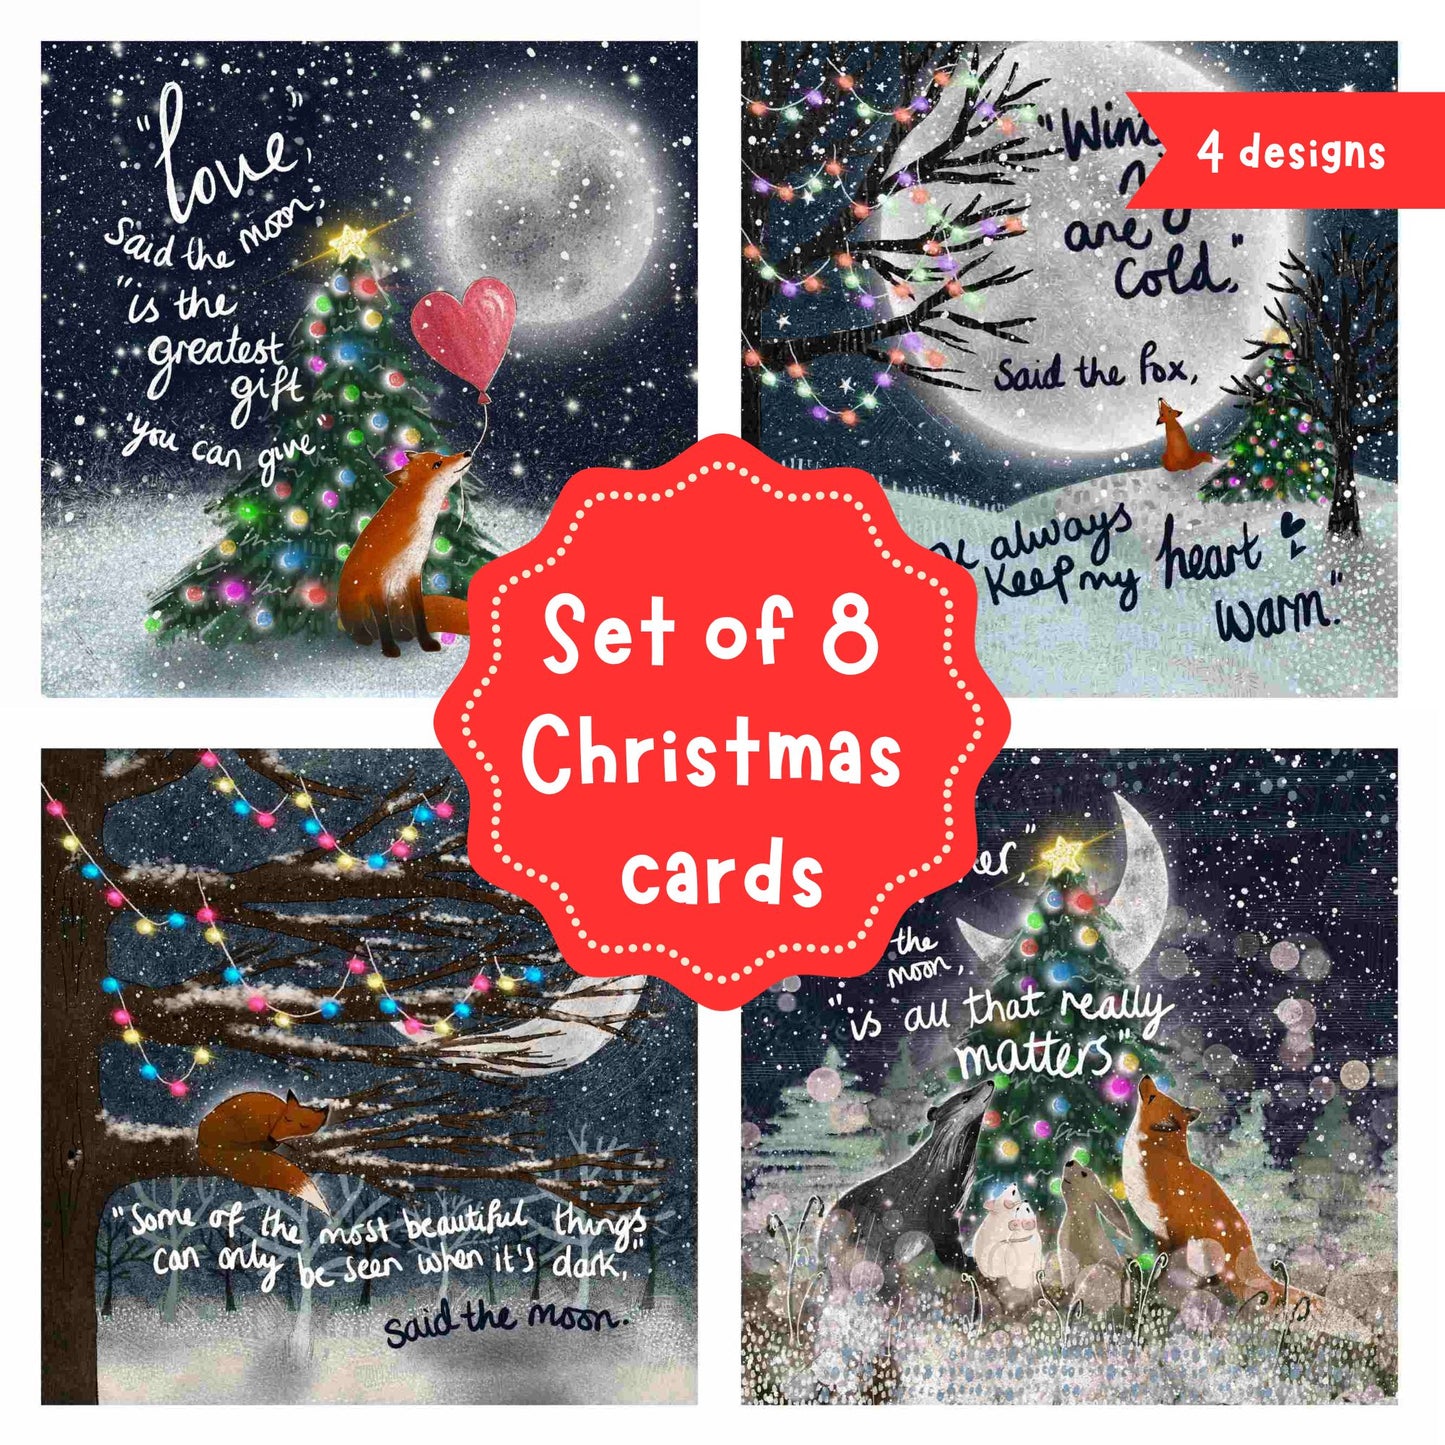 Set of 8 Christmas Cards - 2 each of 4 designs